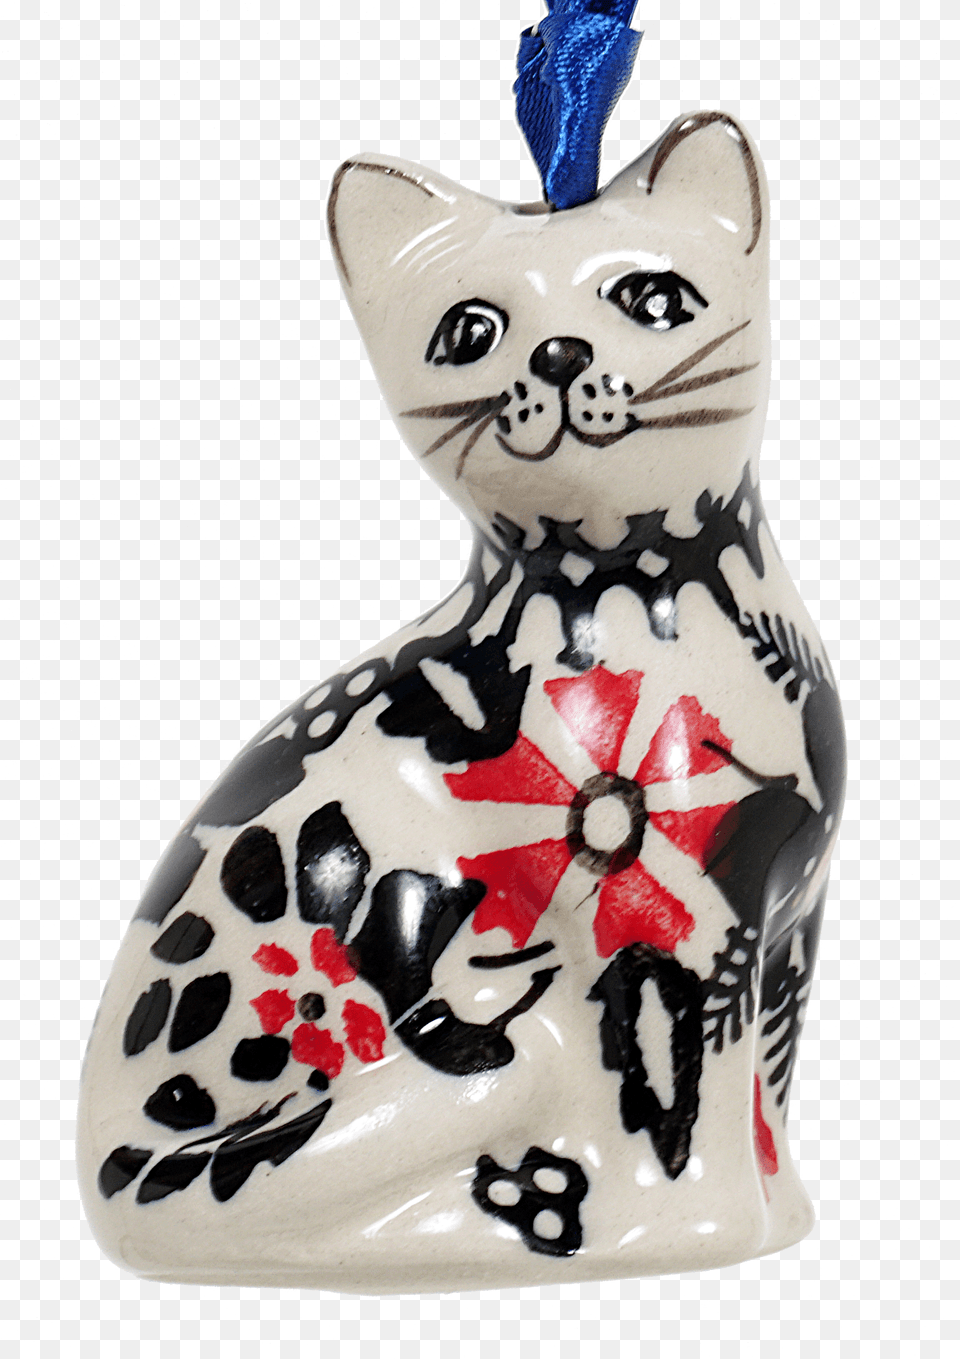 Cat Ornamentclass Lazyload Lazyload Mirage Primary Squitten, Pottery, Art, Porcelain, Figurine Free Png